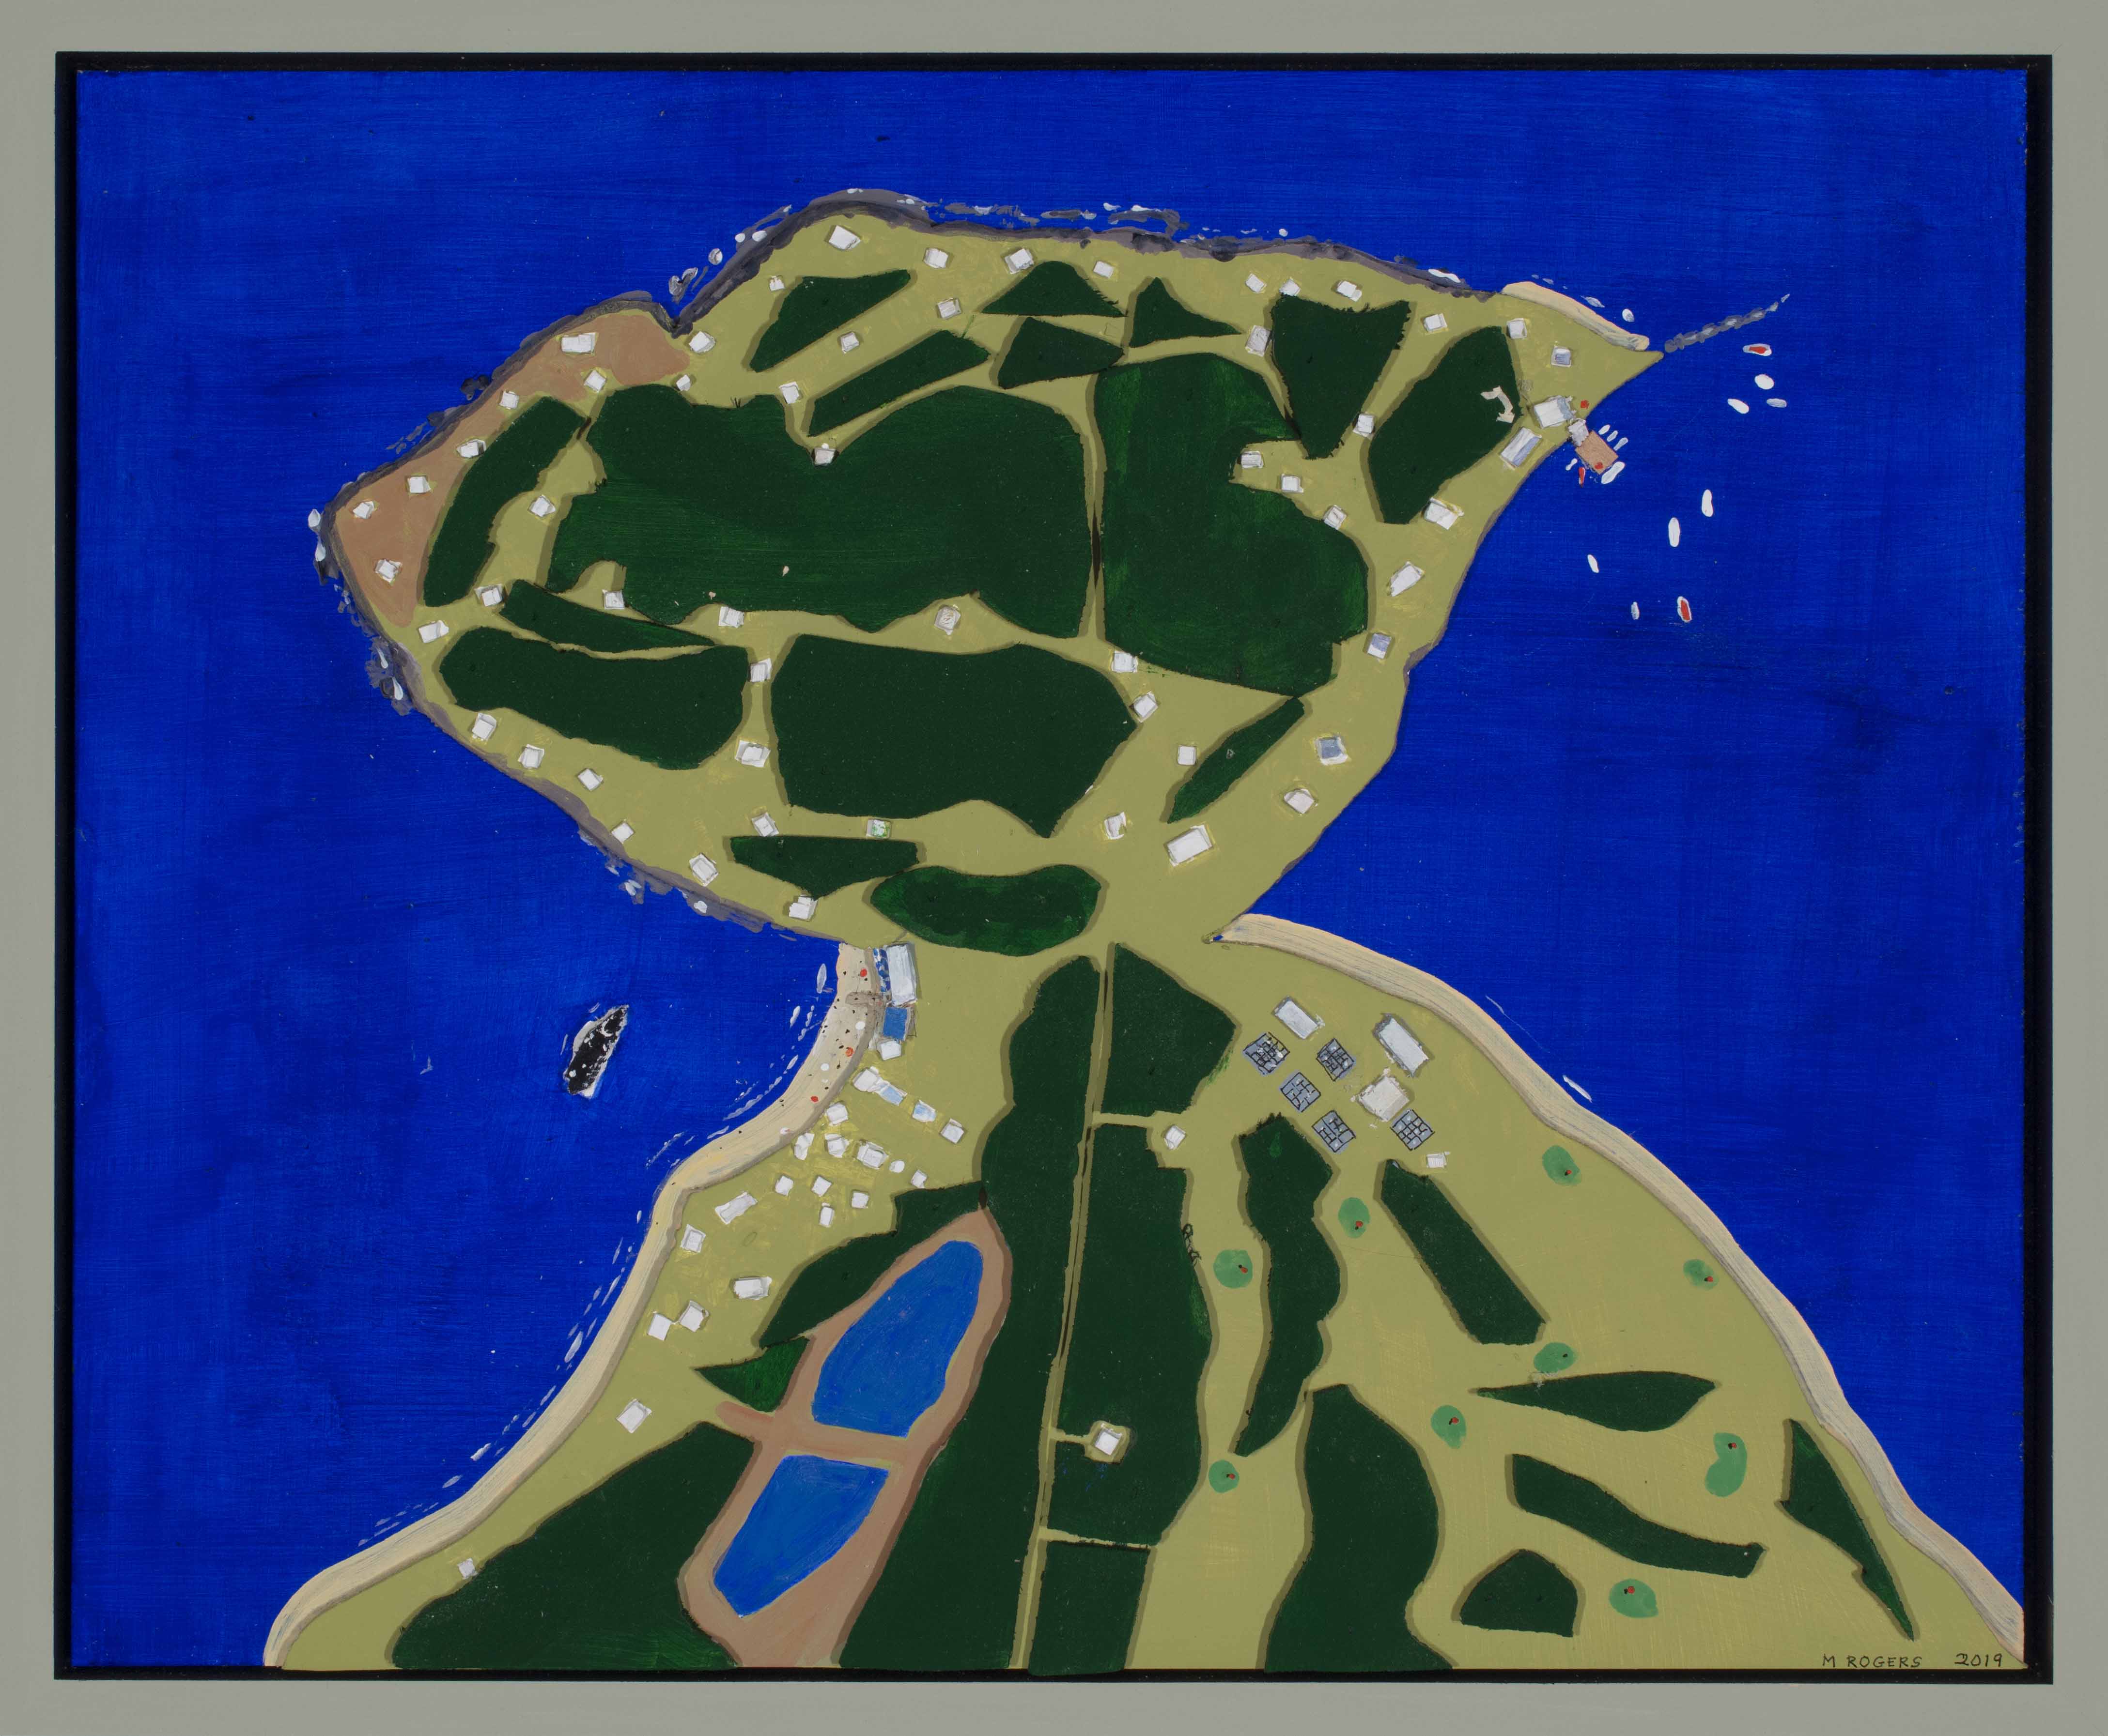 Prouts Neck Birdseye View, 2019, acrylic on wood, 16 x 19 inches